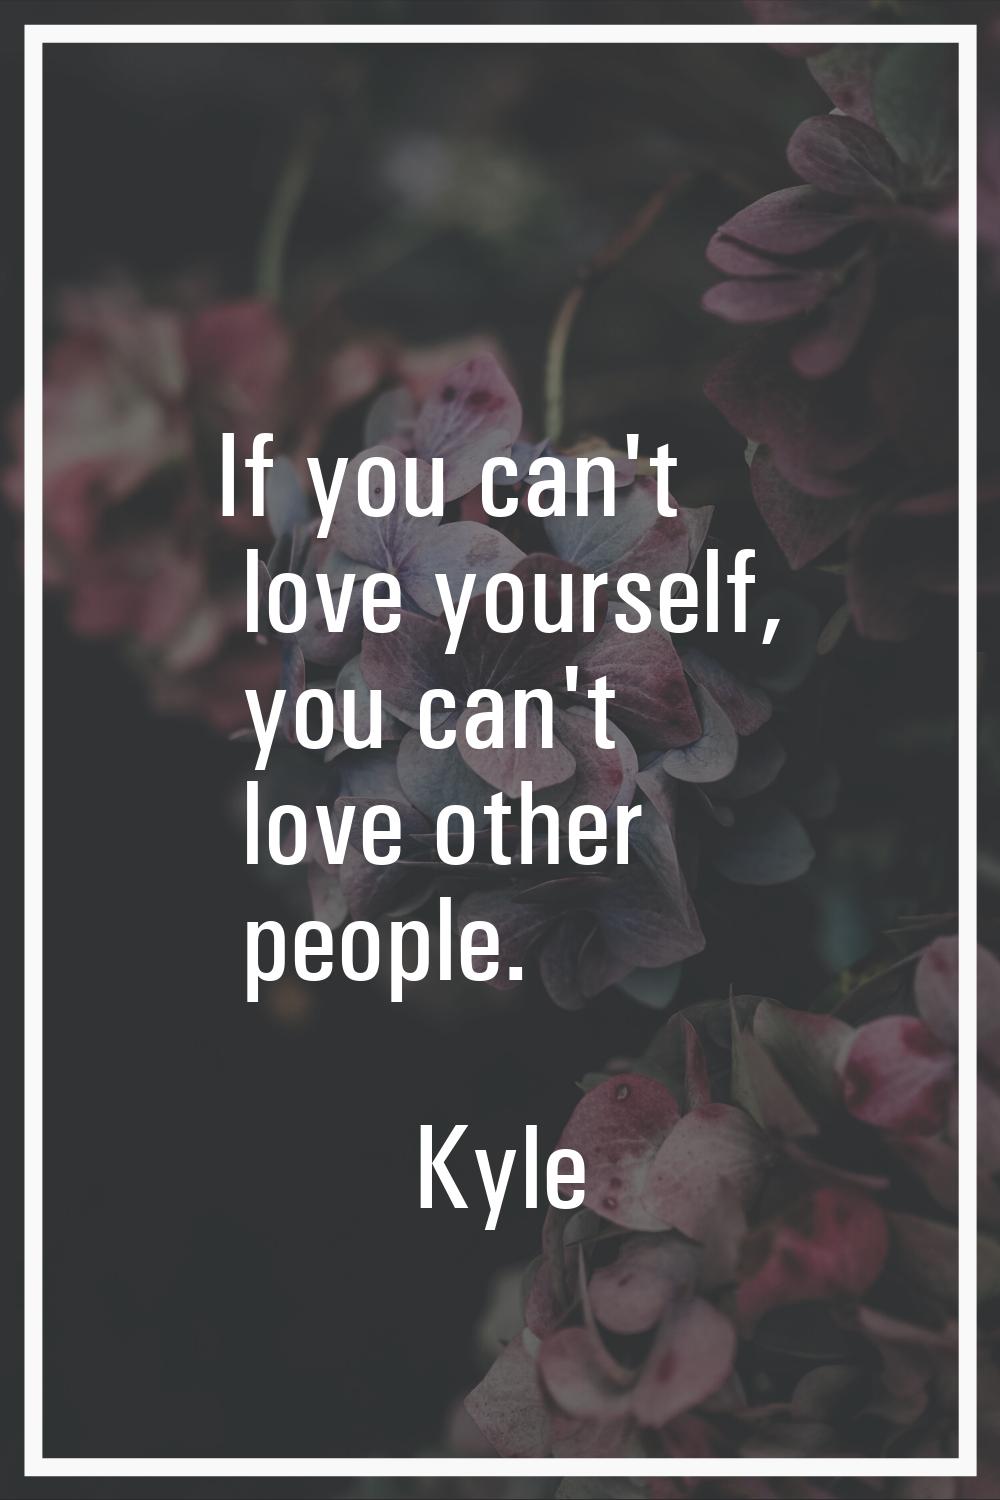 If you can't love yourself, you can't love other people.